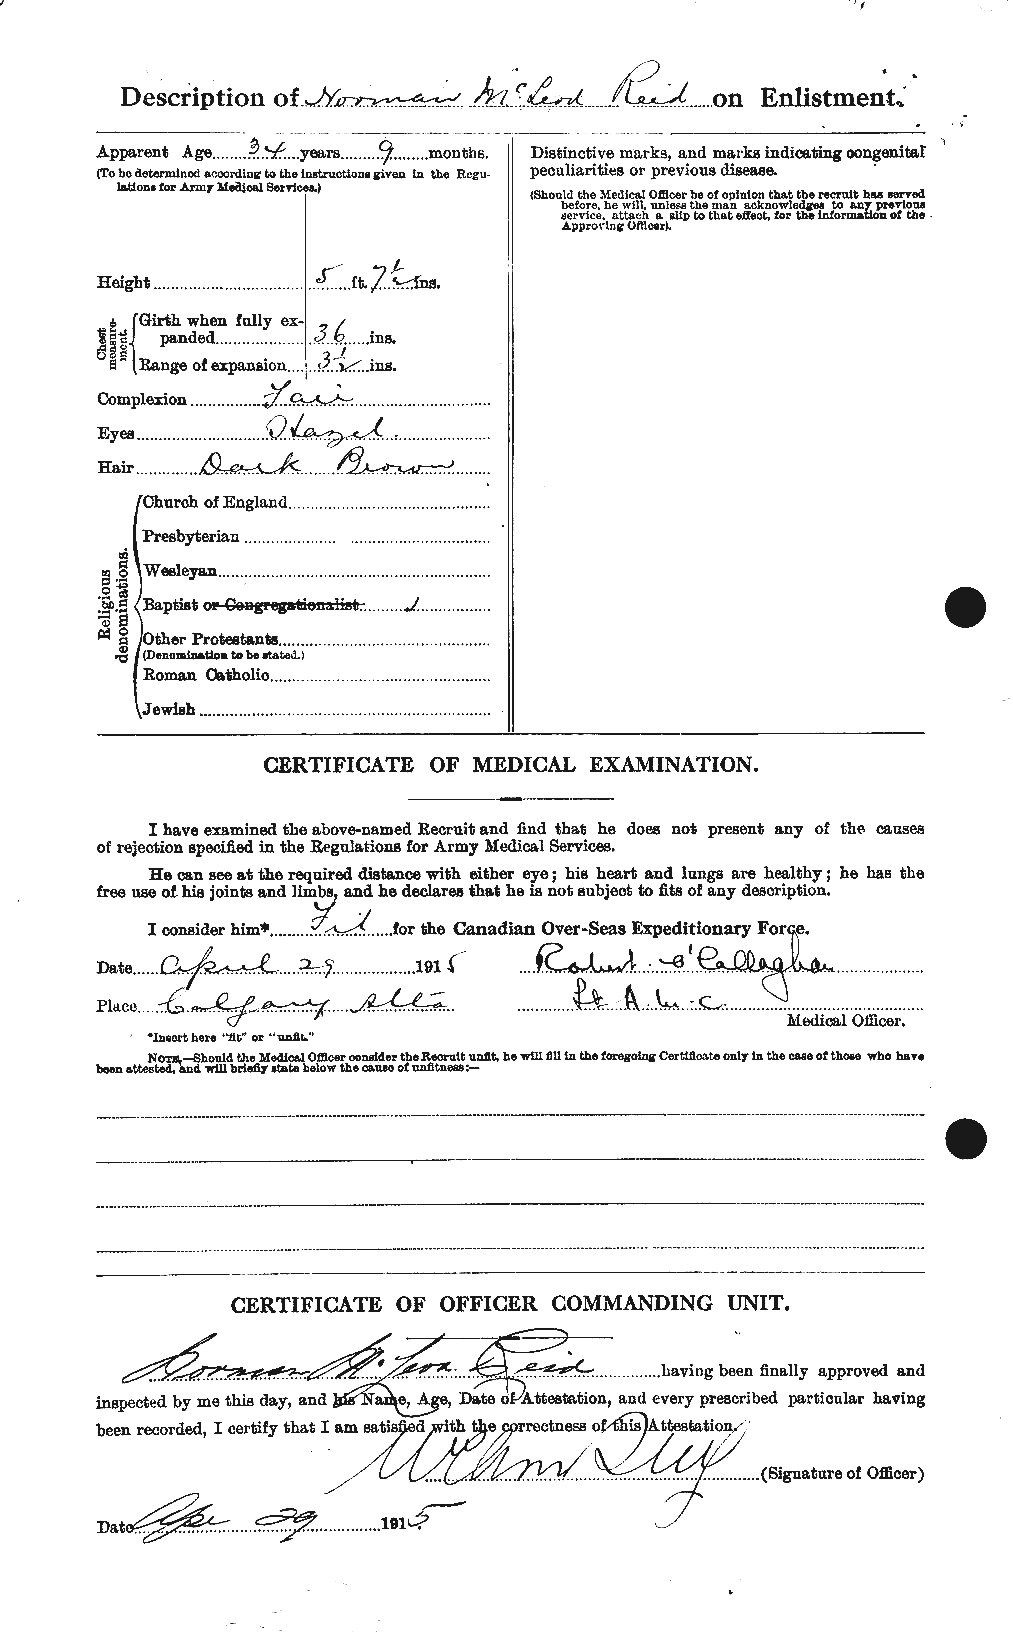 Personnel Records of the First World War - CEF 598966b